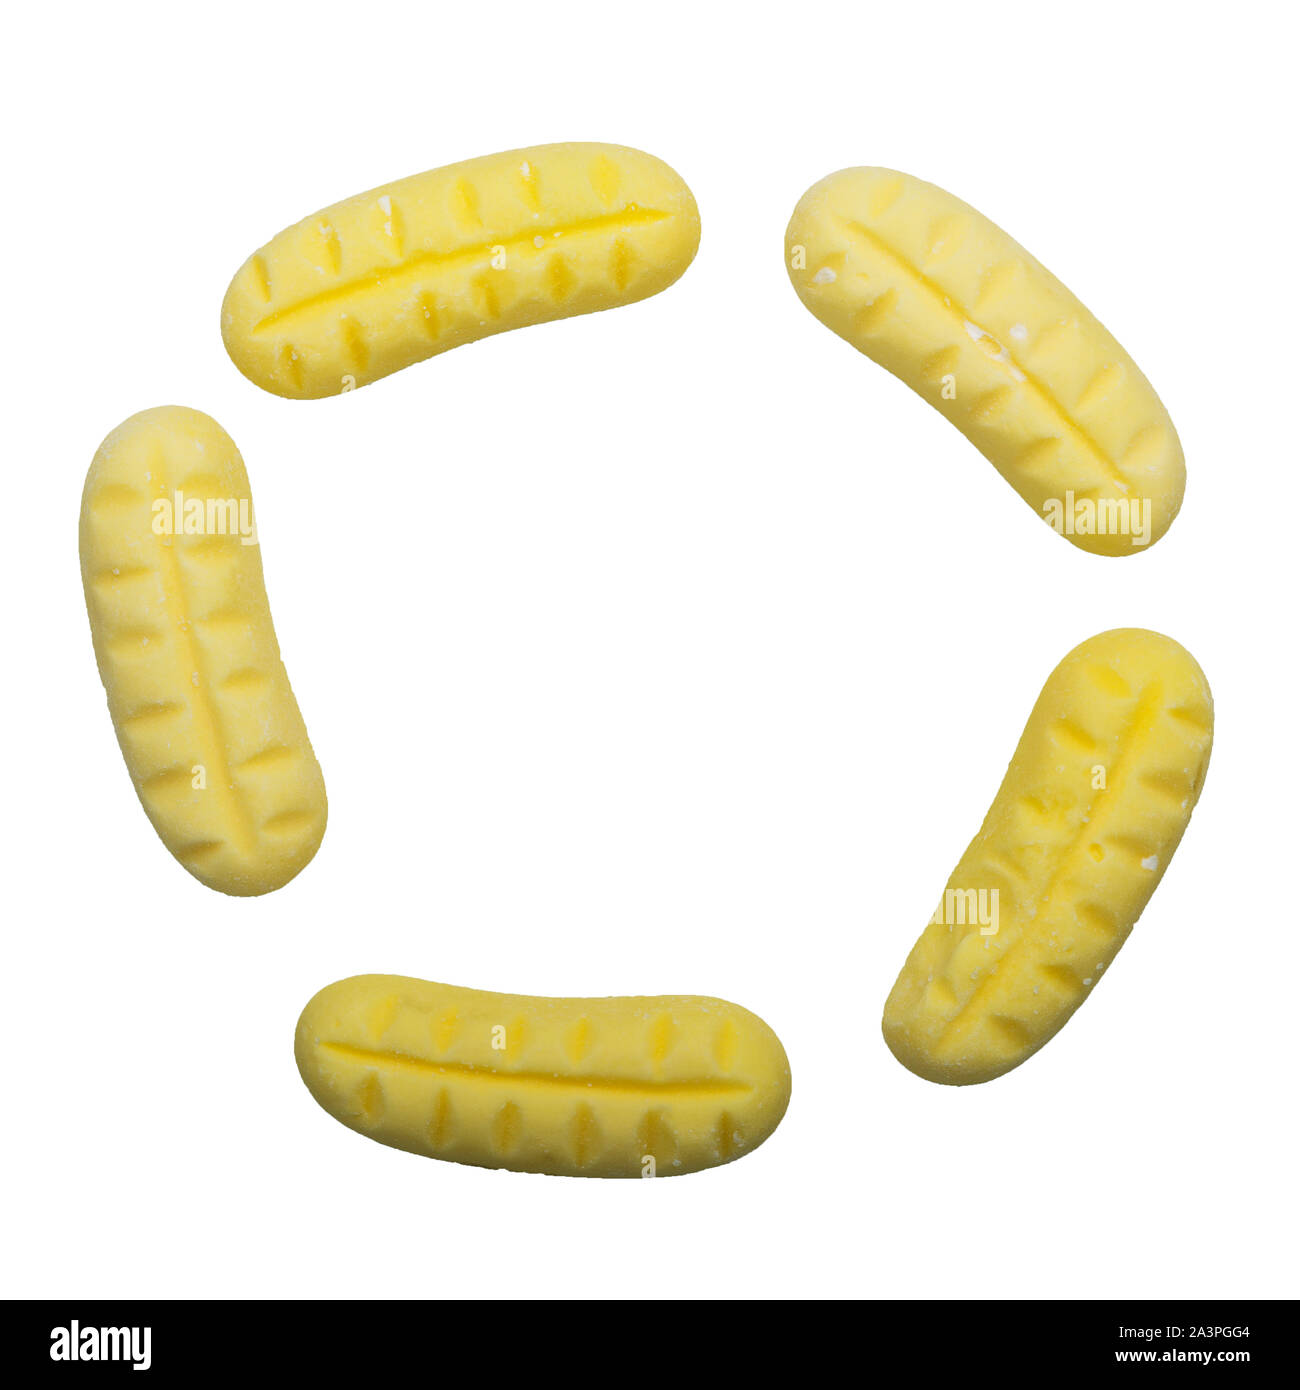 Foam Banana sweets on a white background Stock Photo